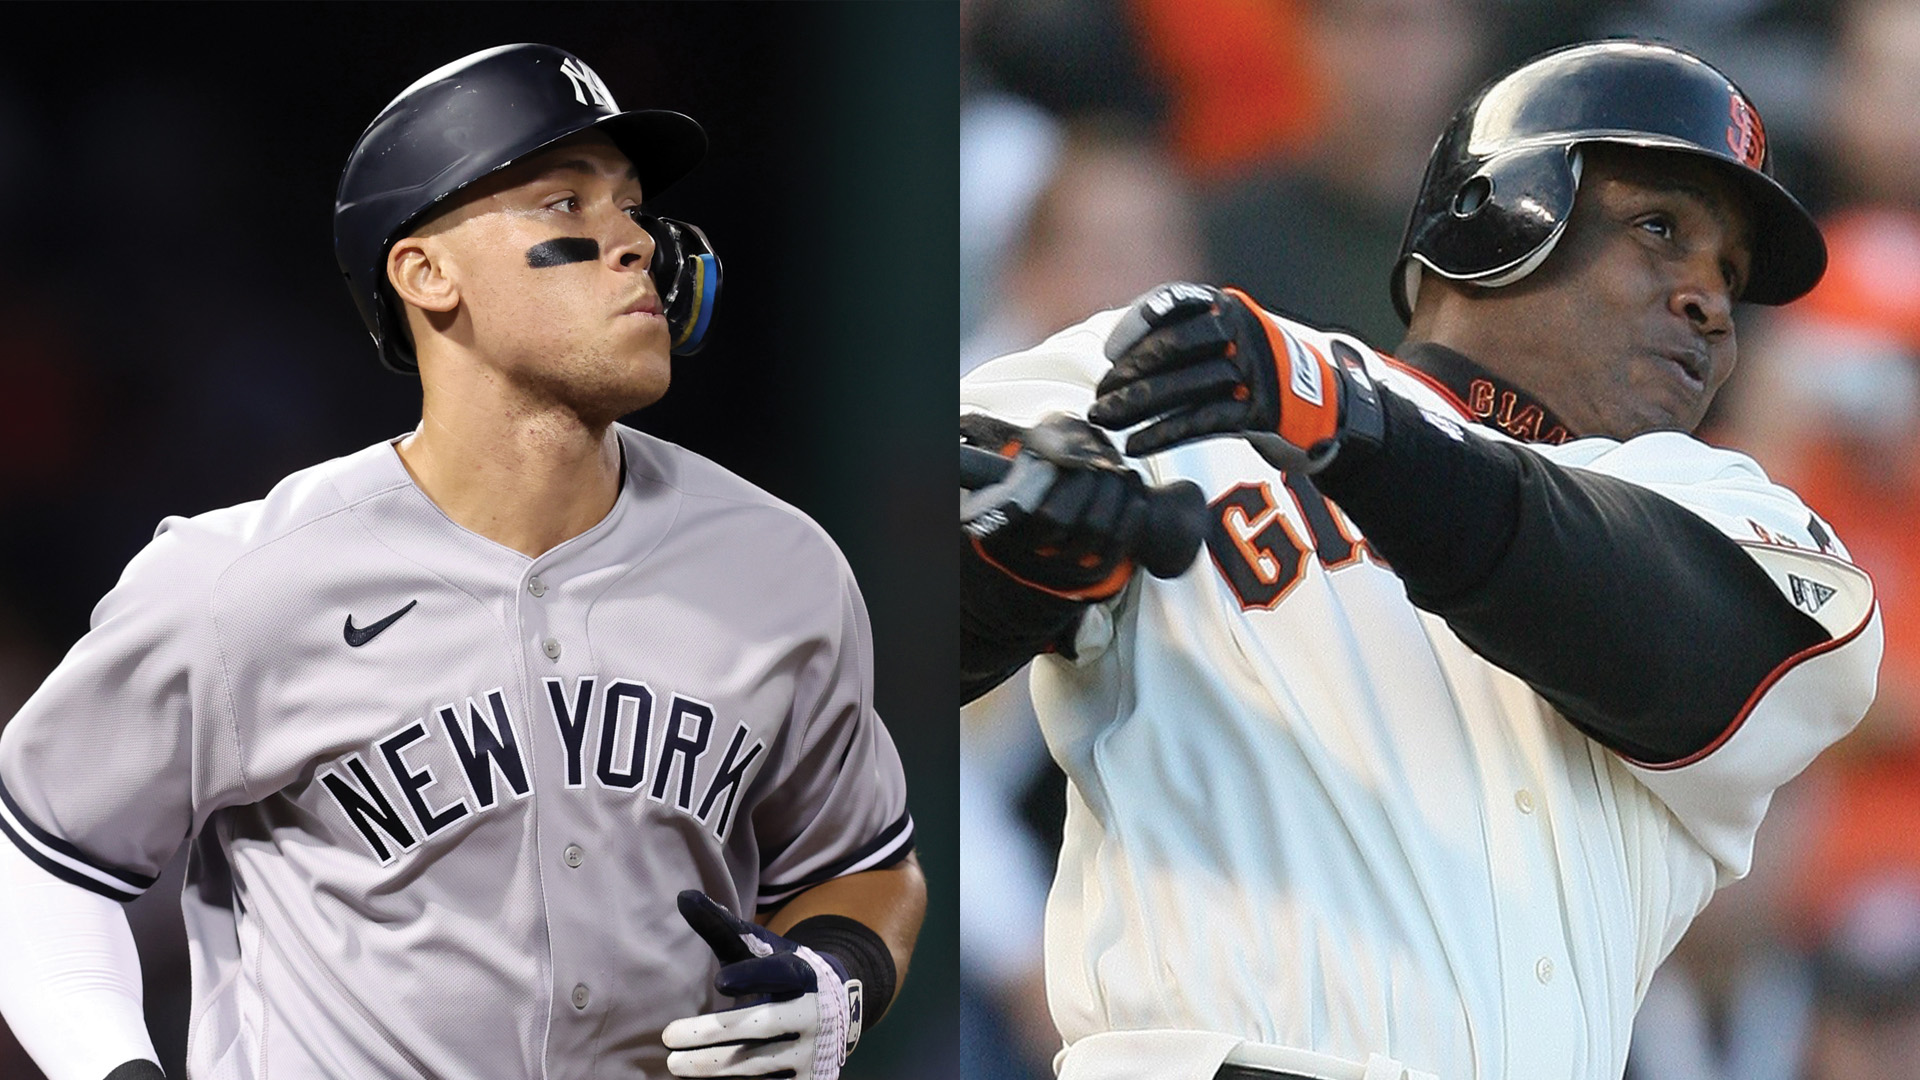 Barry Bonds vs. Aaron Judge: Who is the True Home Run King? - CLNS